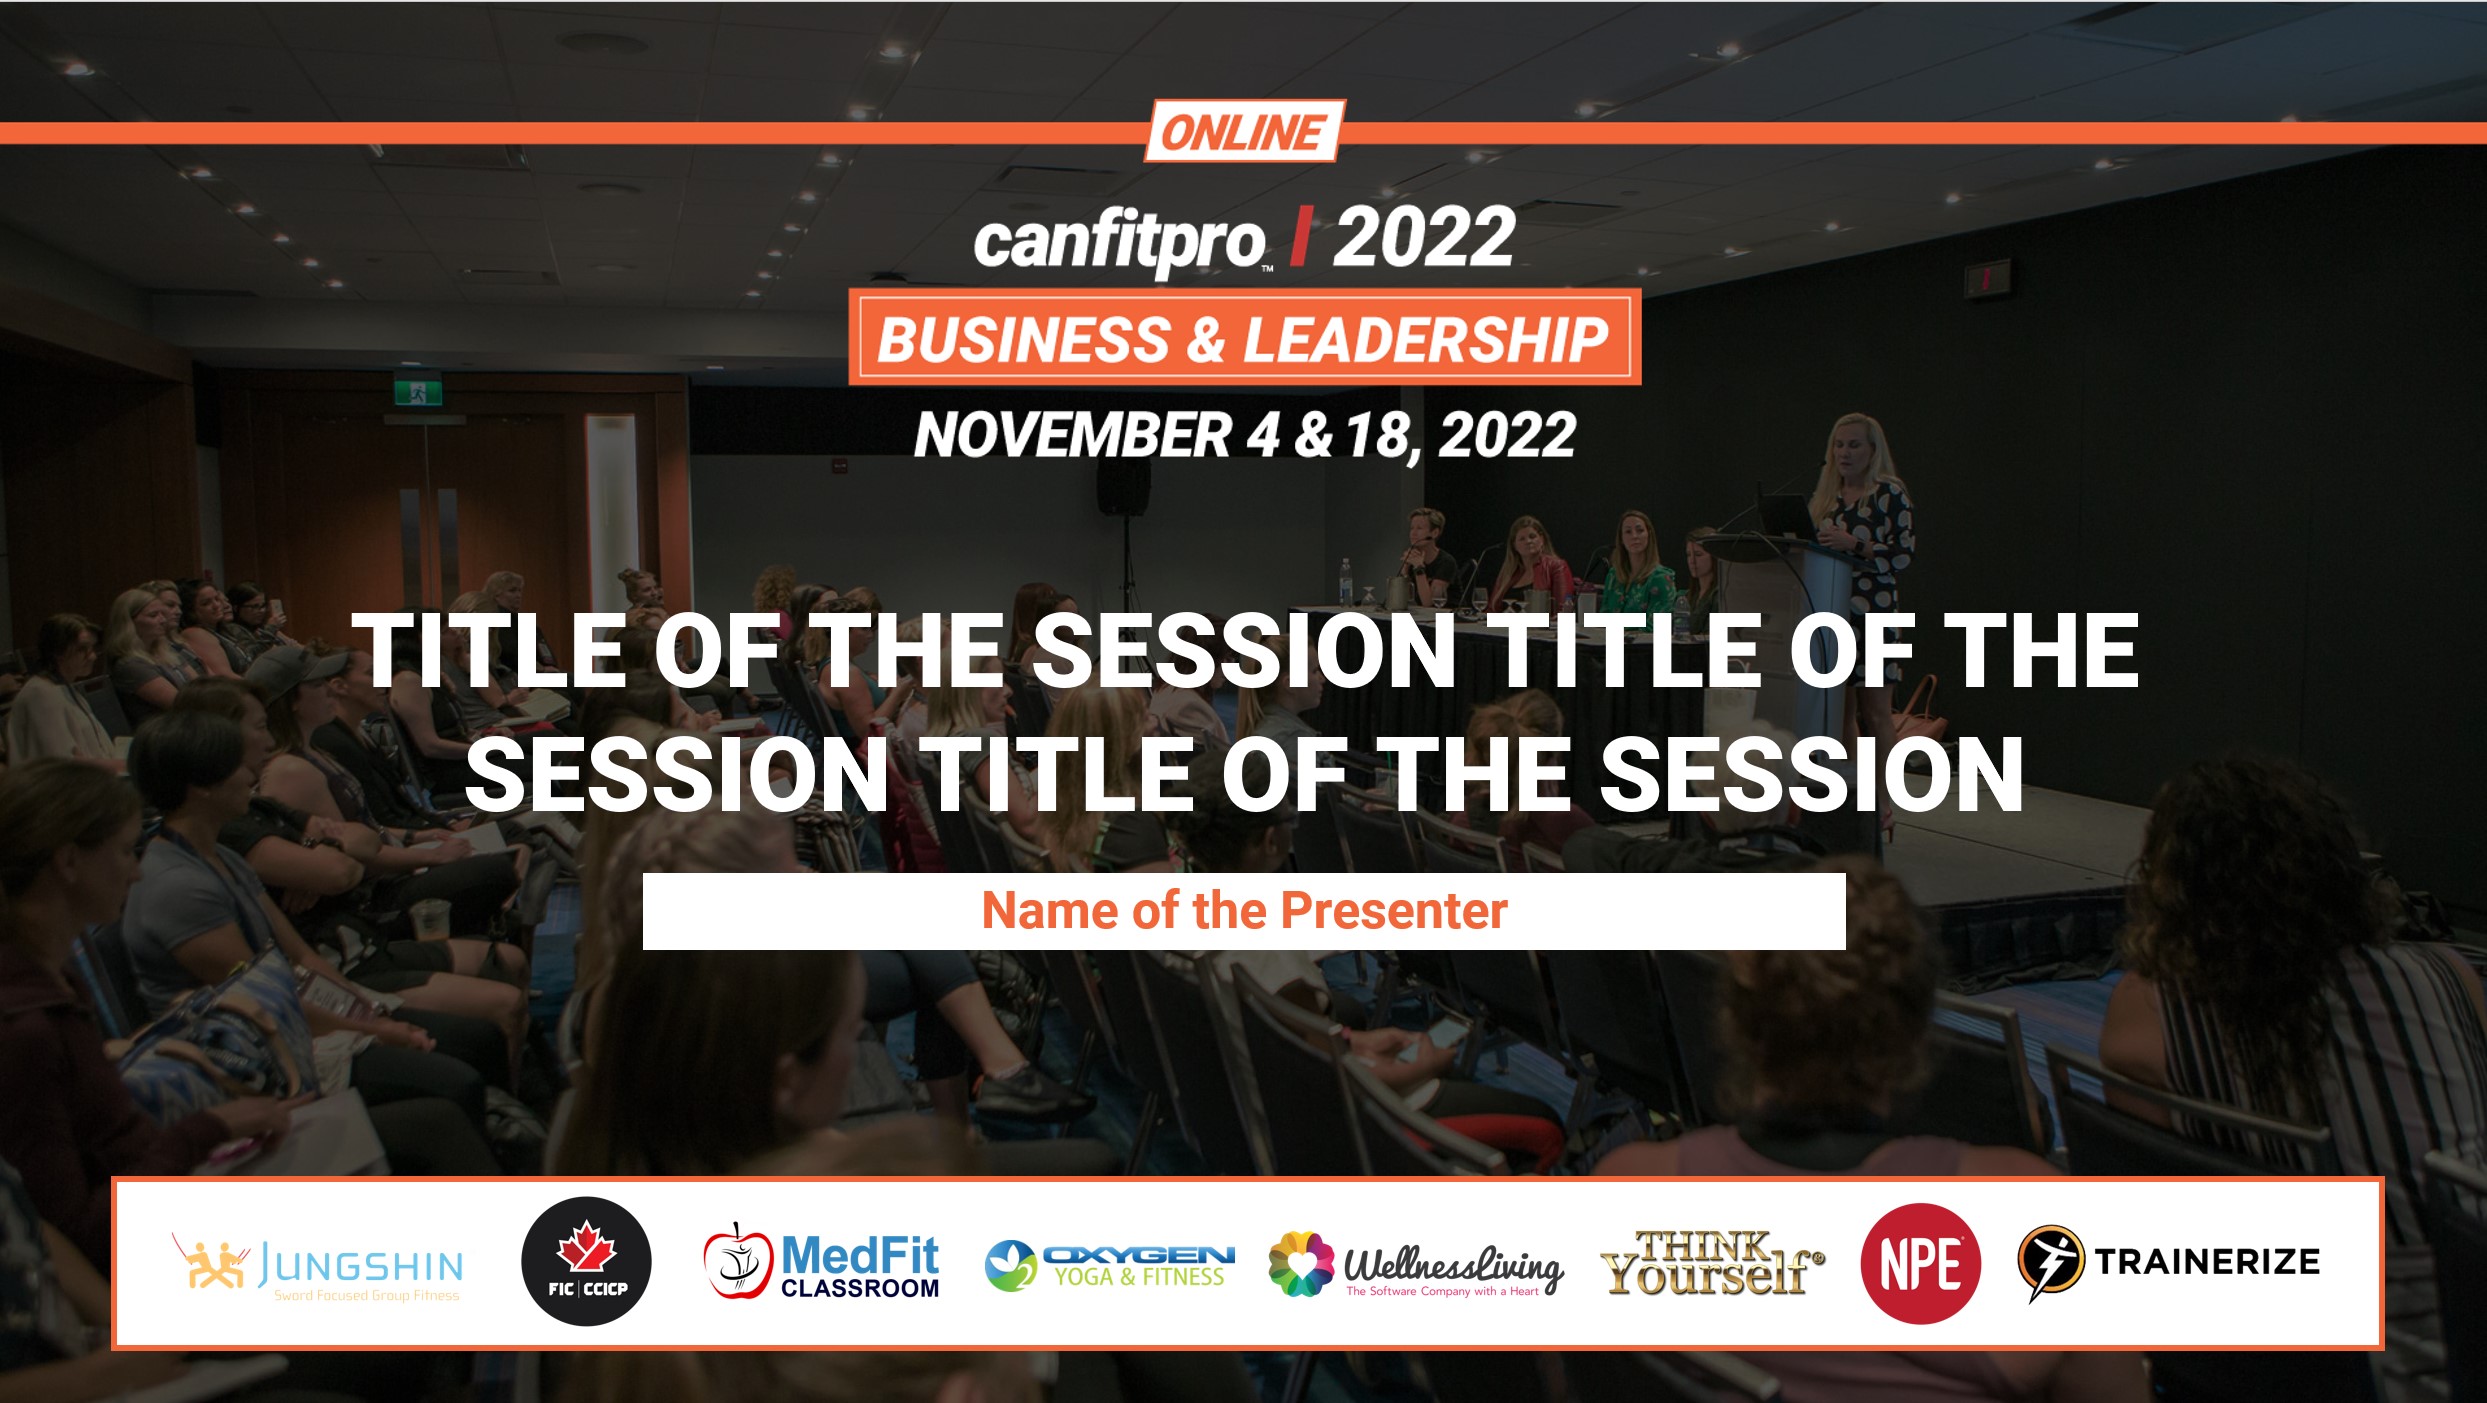 canfitpro 2022 online: Business & Leadership Power Point Template